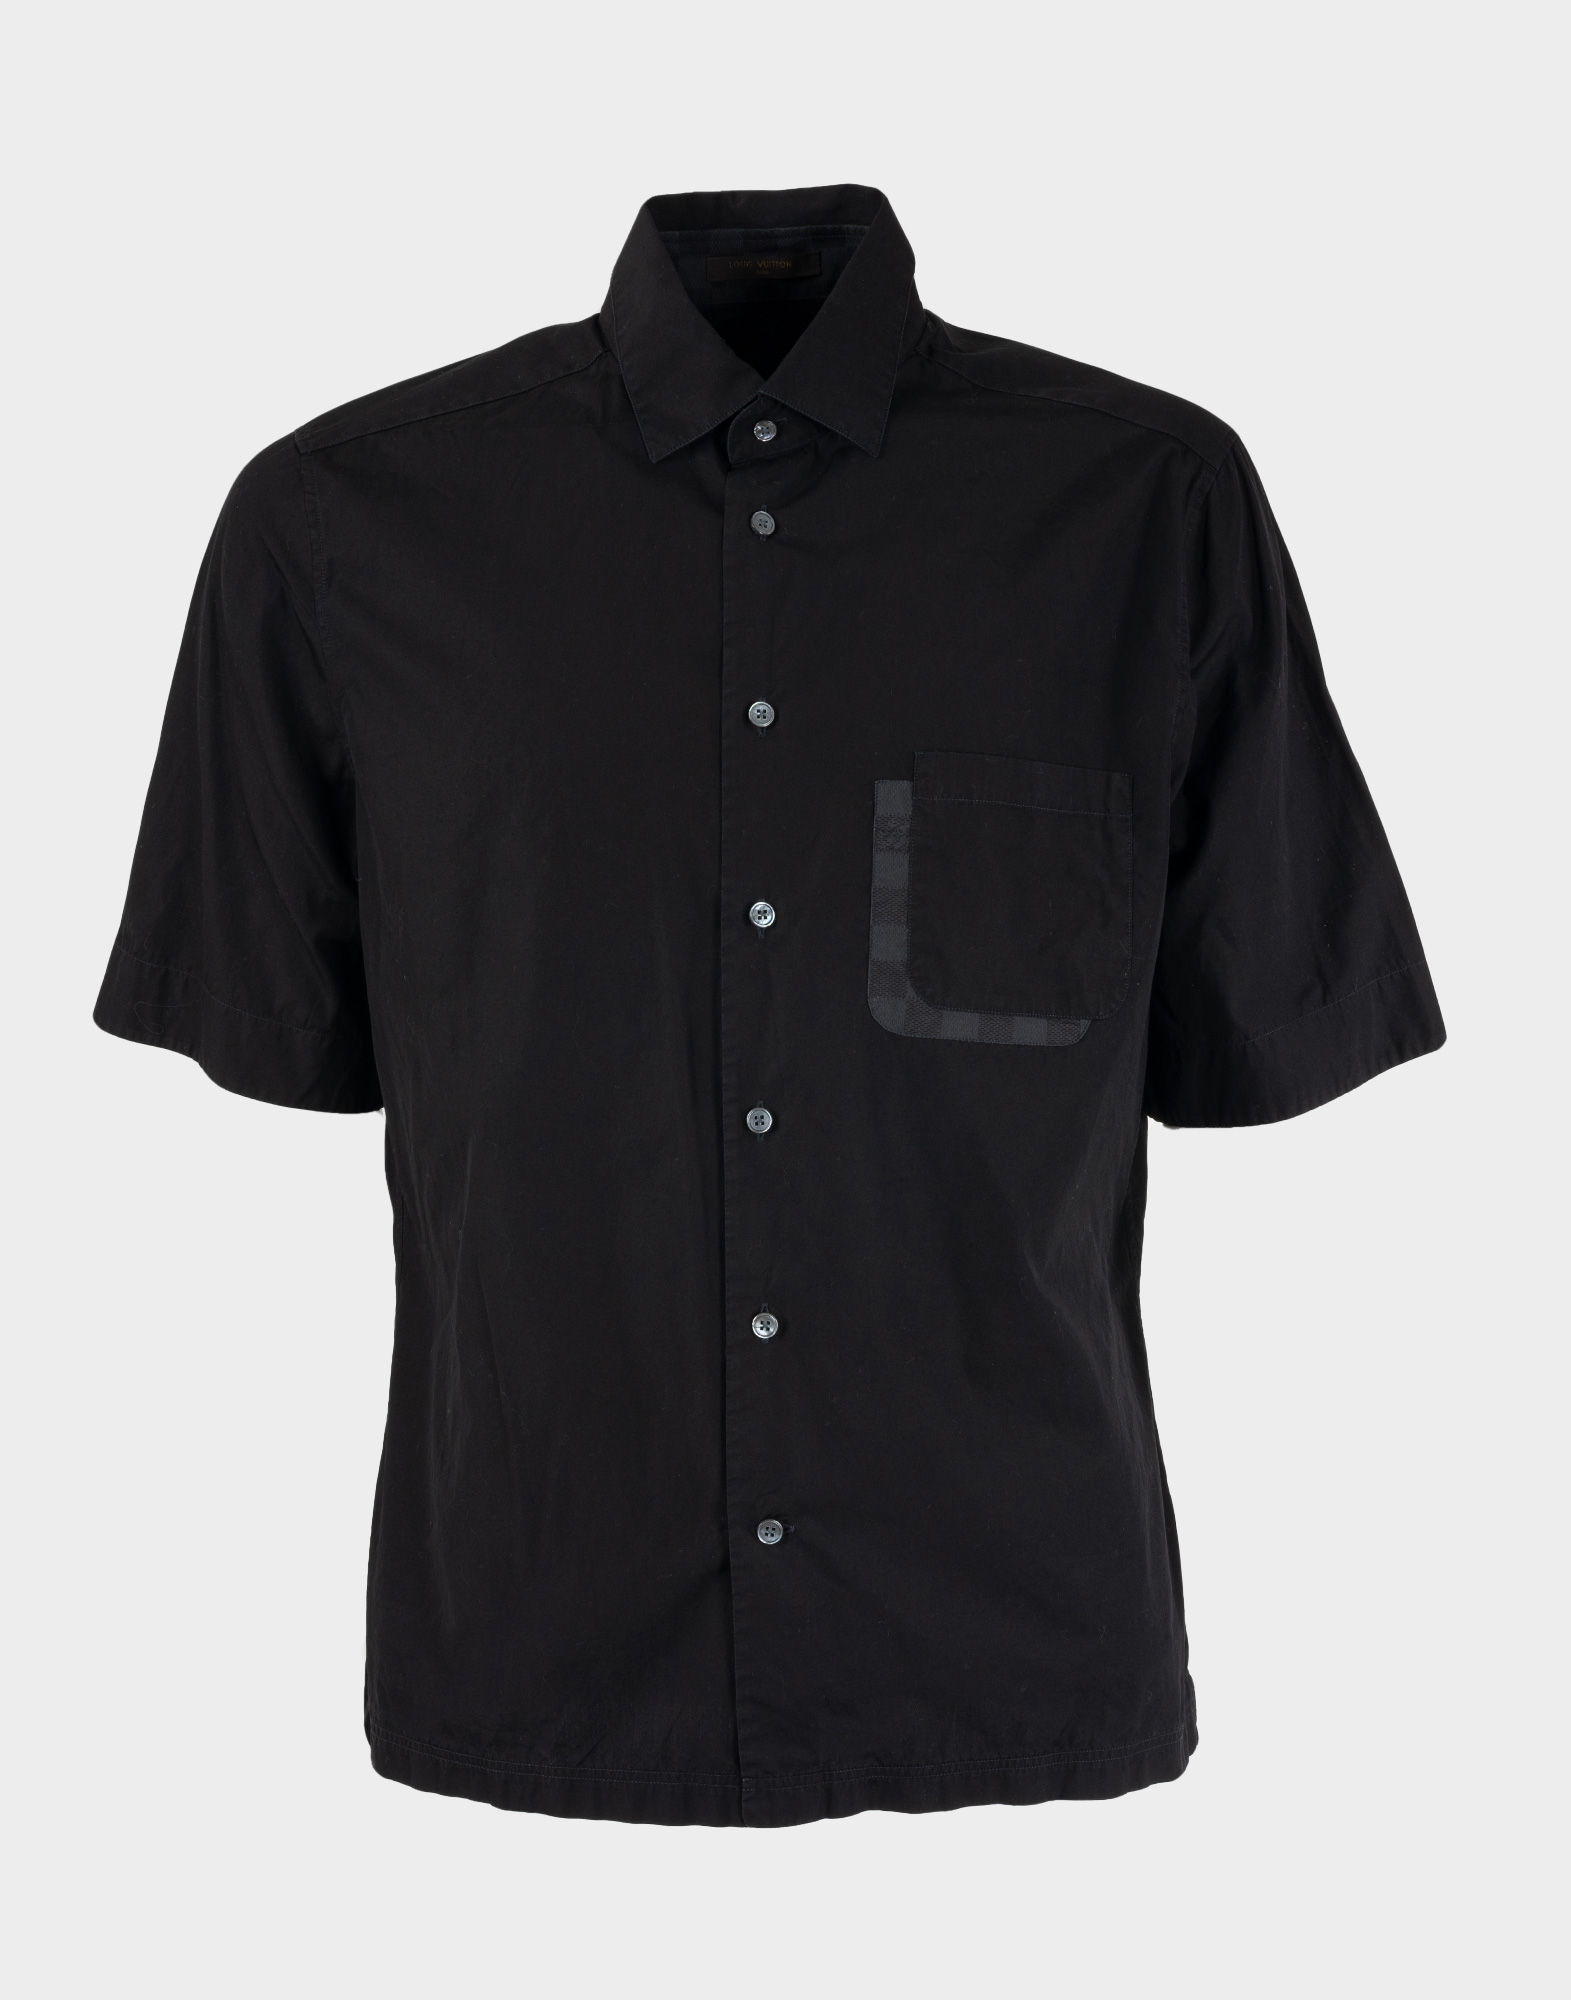 black men's short-sleeved shirt with button fastening and front pocket